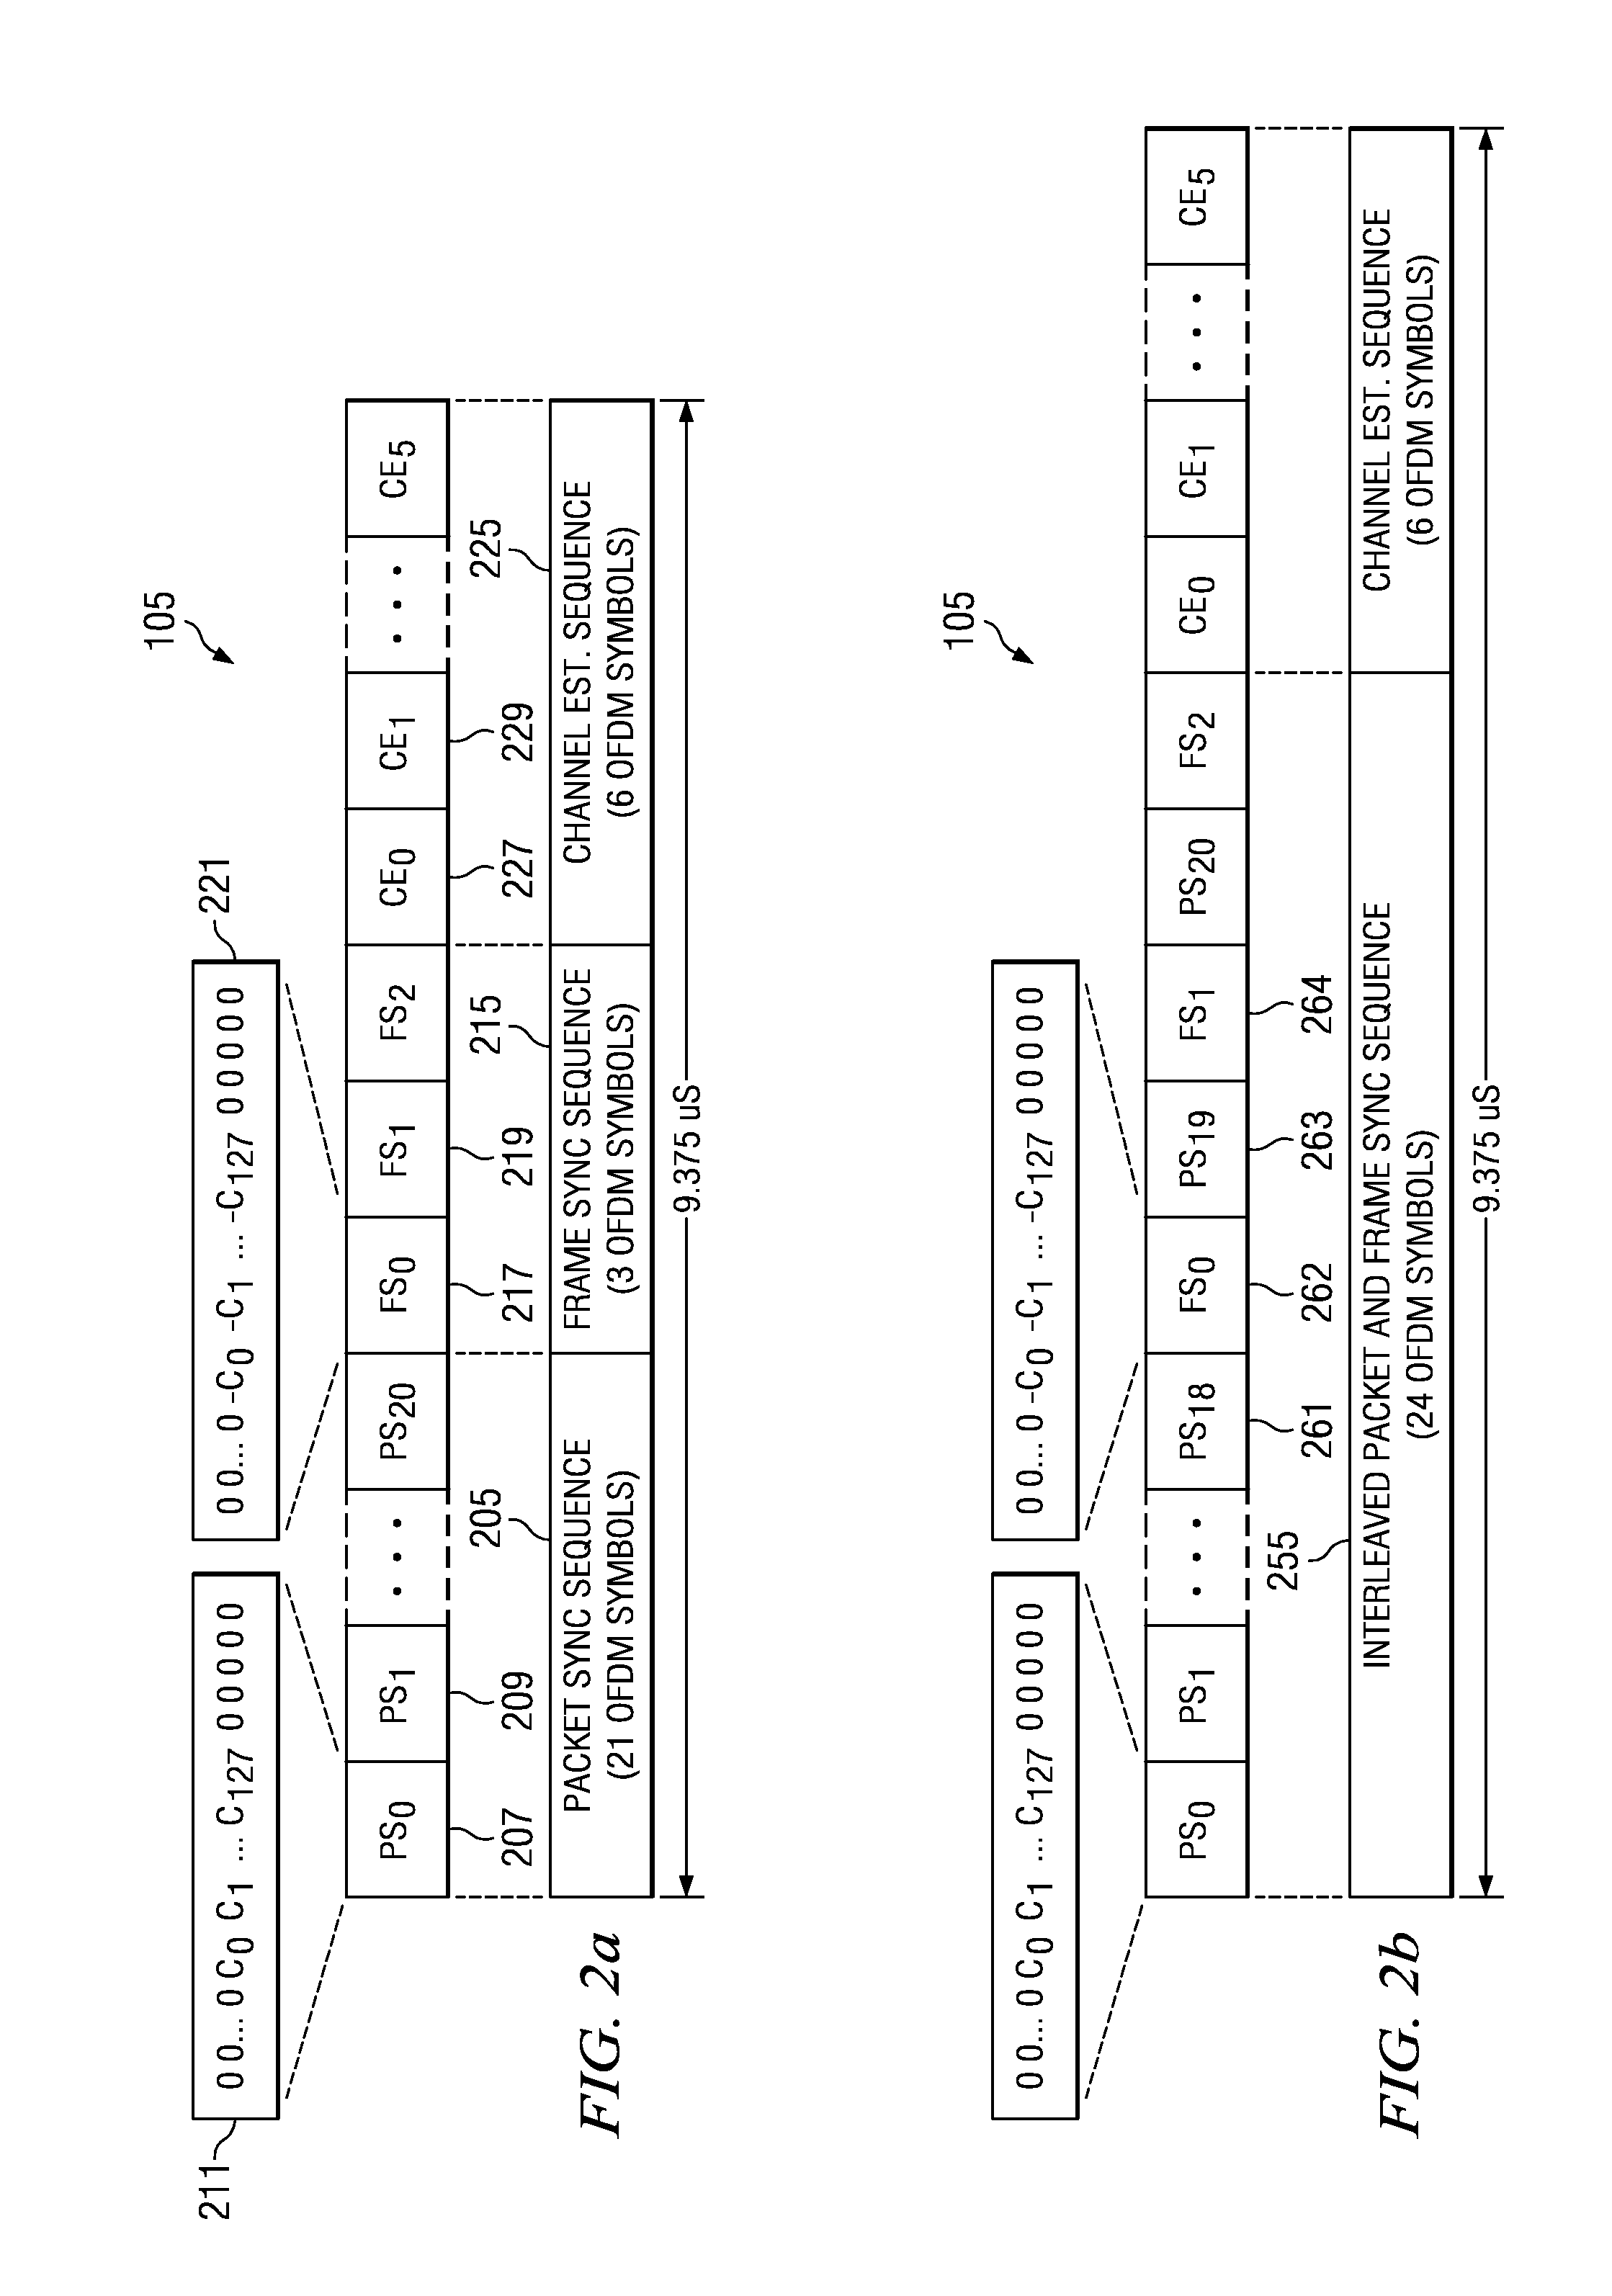 Preamble for a TFI-OFDM communications system